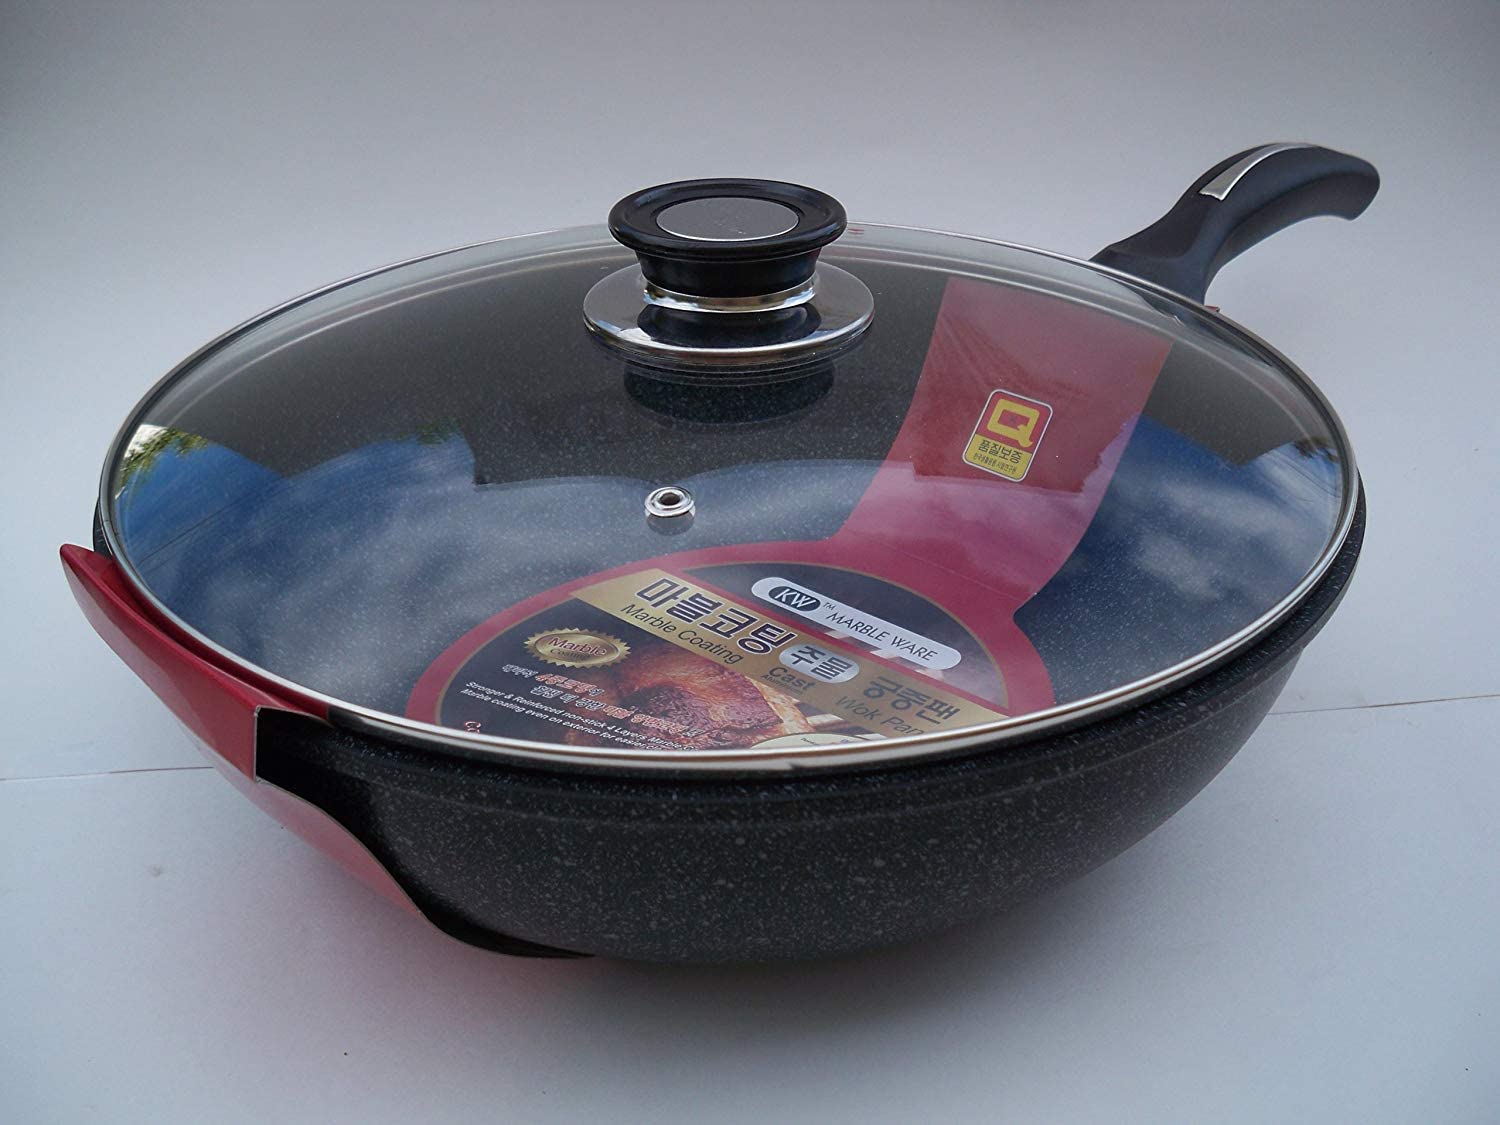 M.V. Trading Ceramic Marble Coated Cast Aluminium Non Stick Stir Fry Wok With Glass Lid